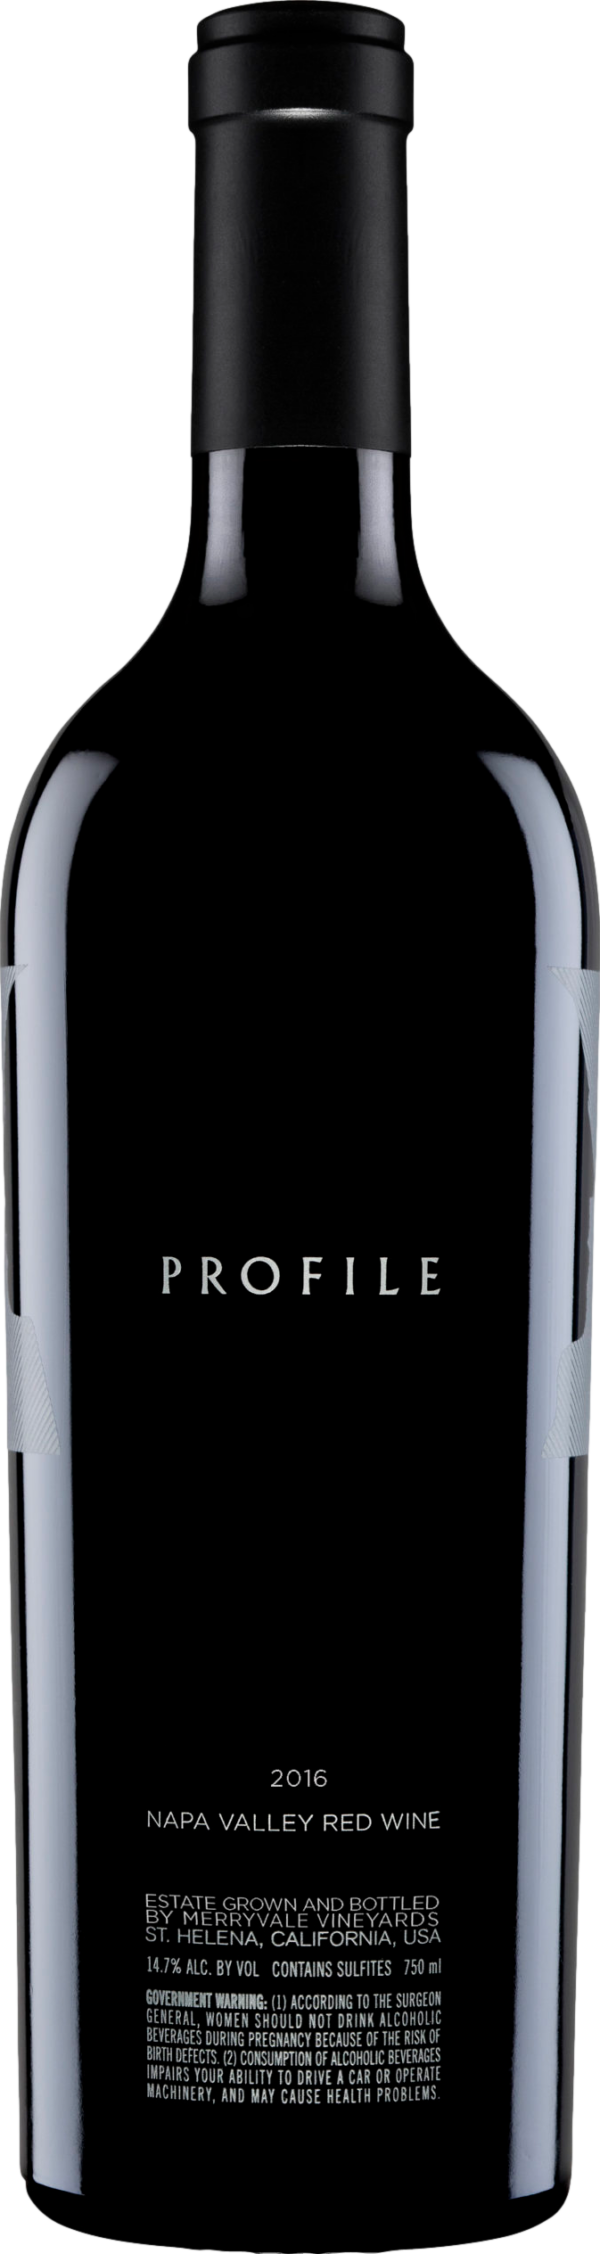 Product image of Merryvale Profile 2016 from 8wines